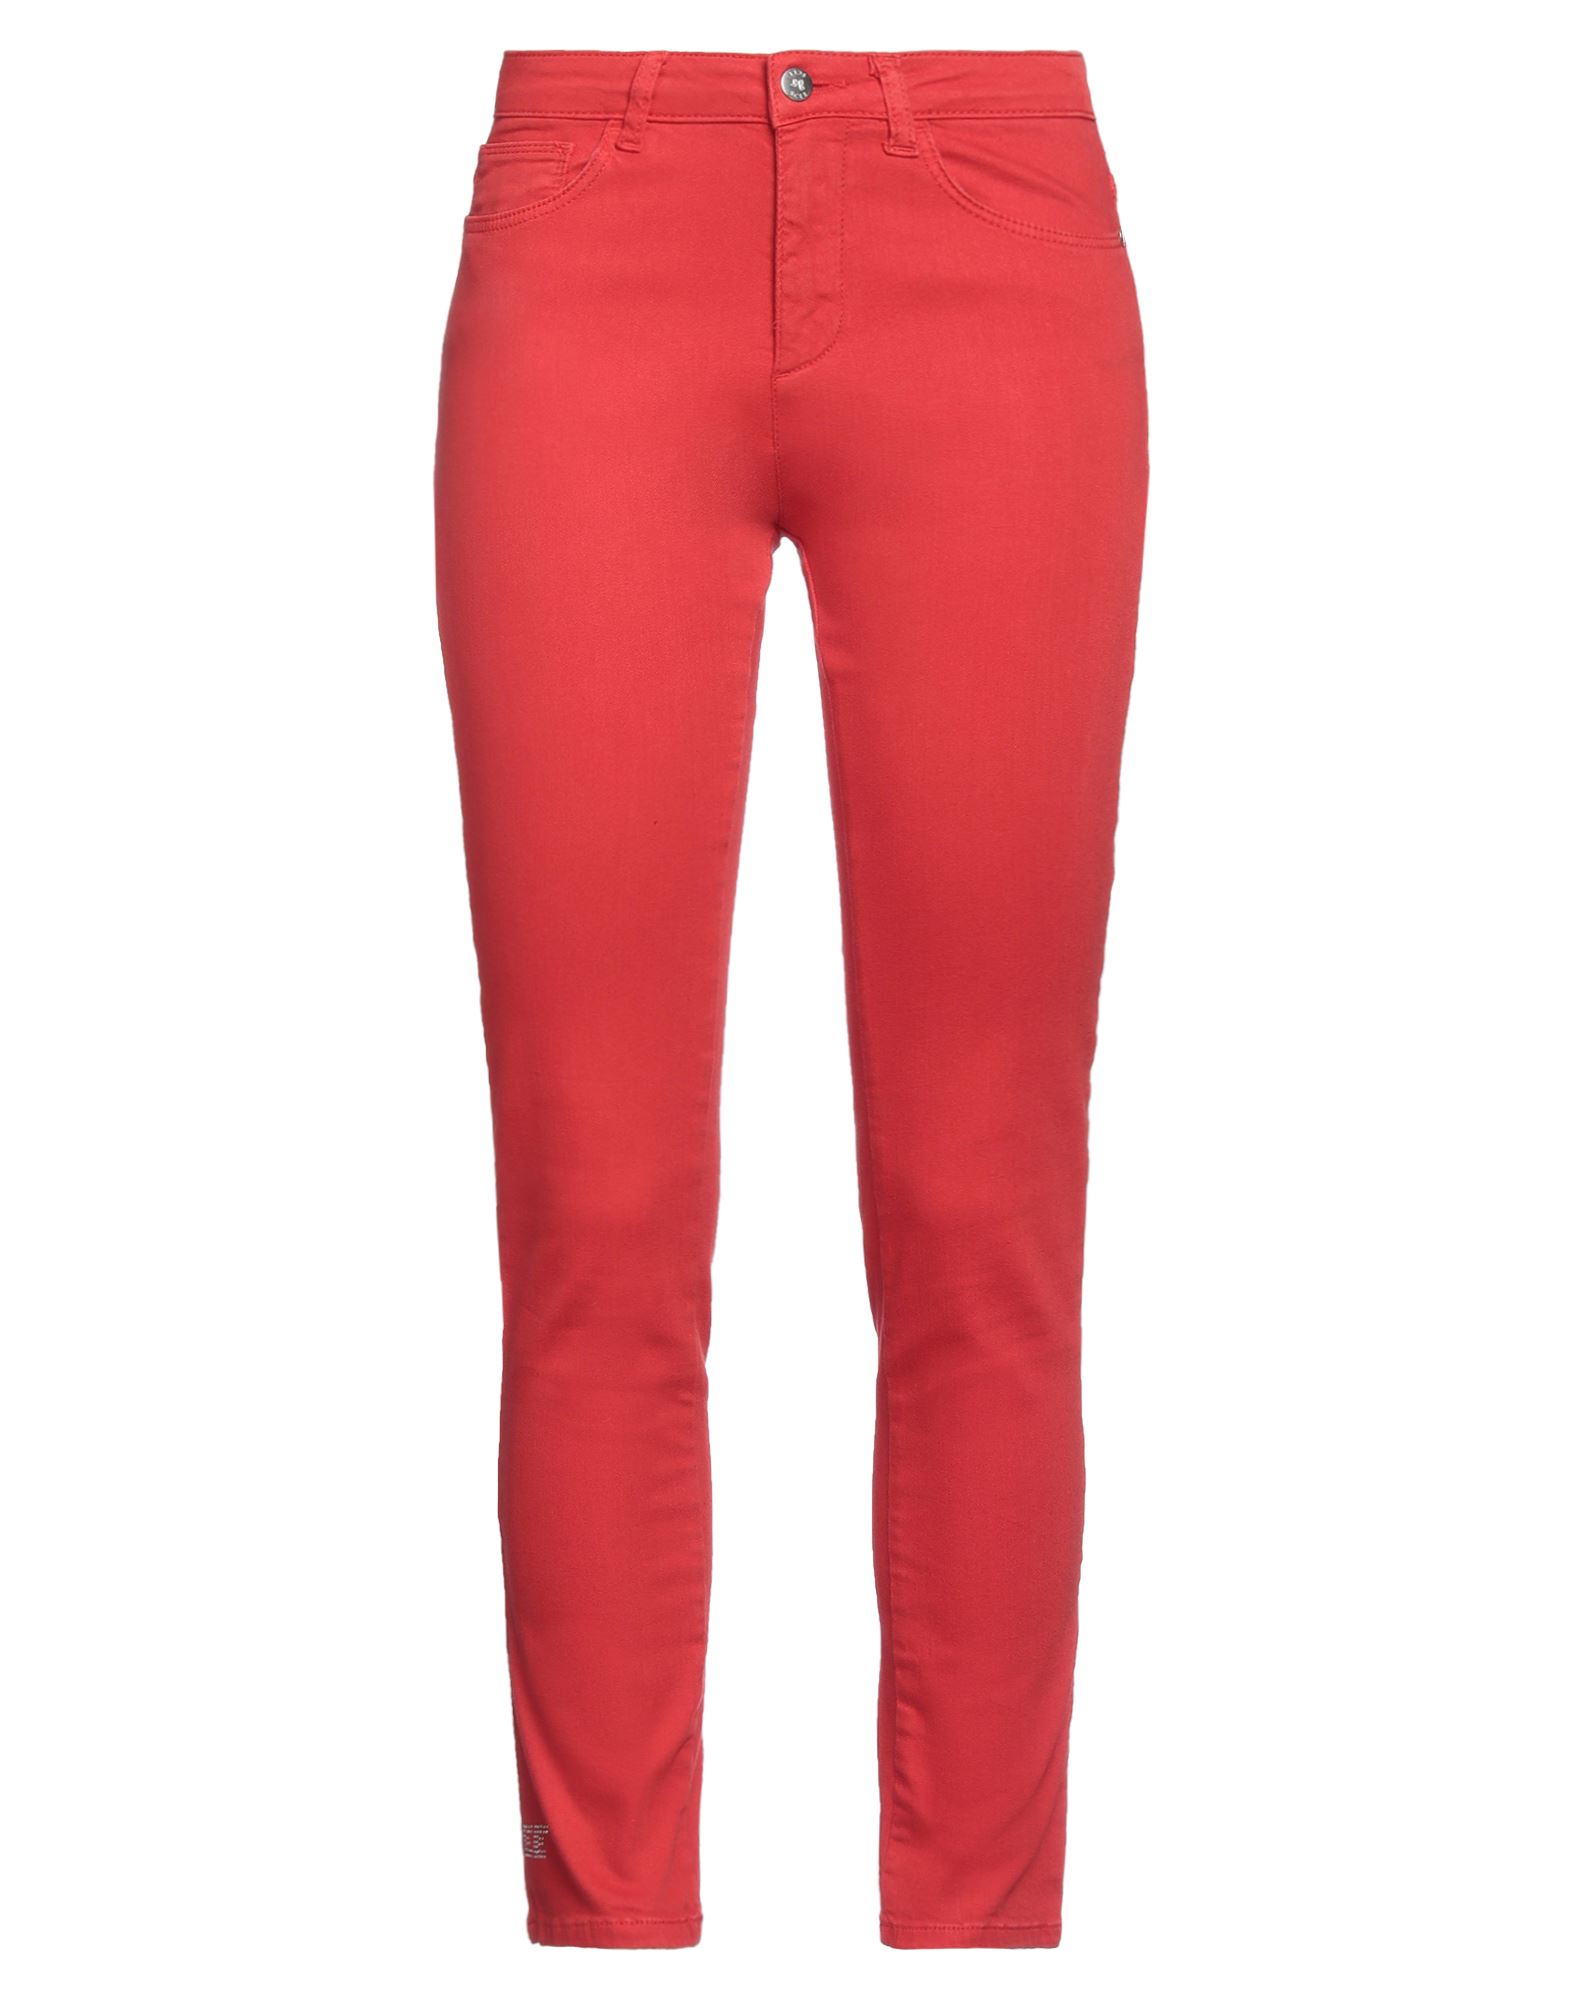 SCEE by TWINSET Jeanshose Damen Rot von SCEE by TWINSET